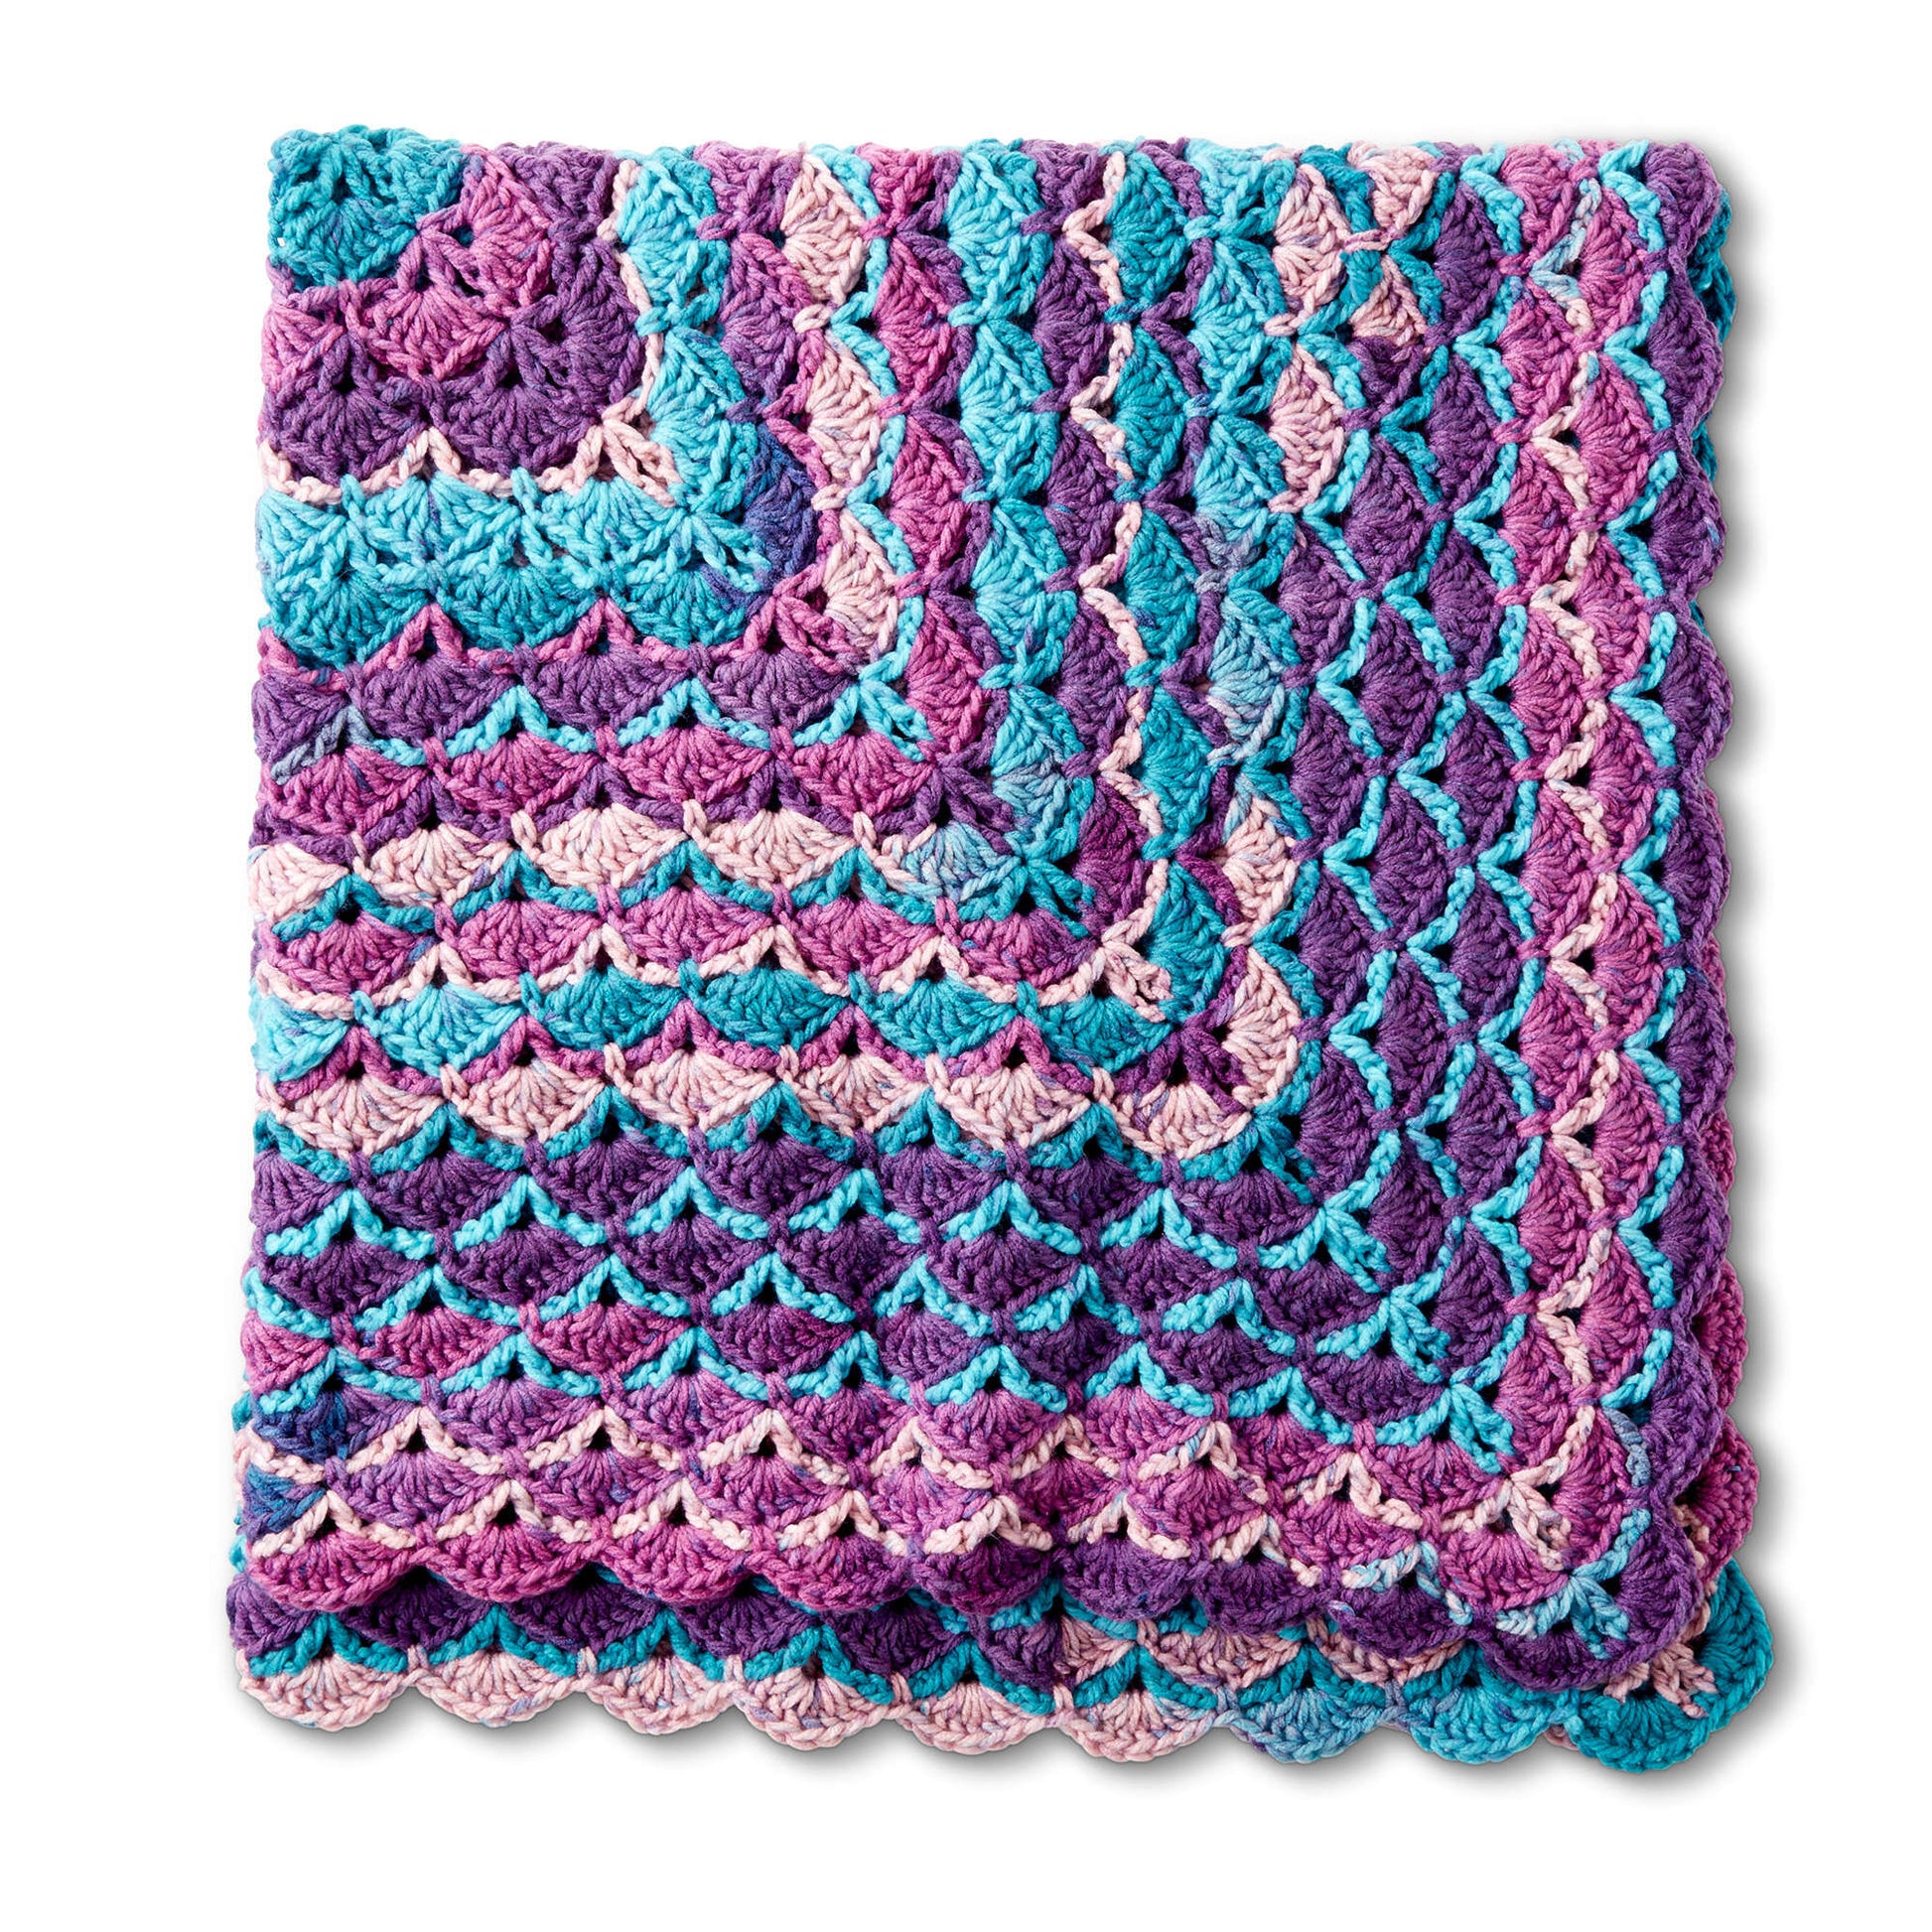 Rectangular moss stitch blanket. Seven Caron Chunky Cakes in Blue Moon and  a size N hook. : r/crochet